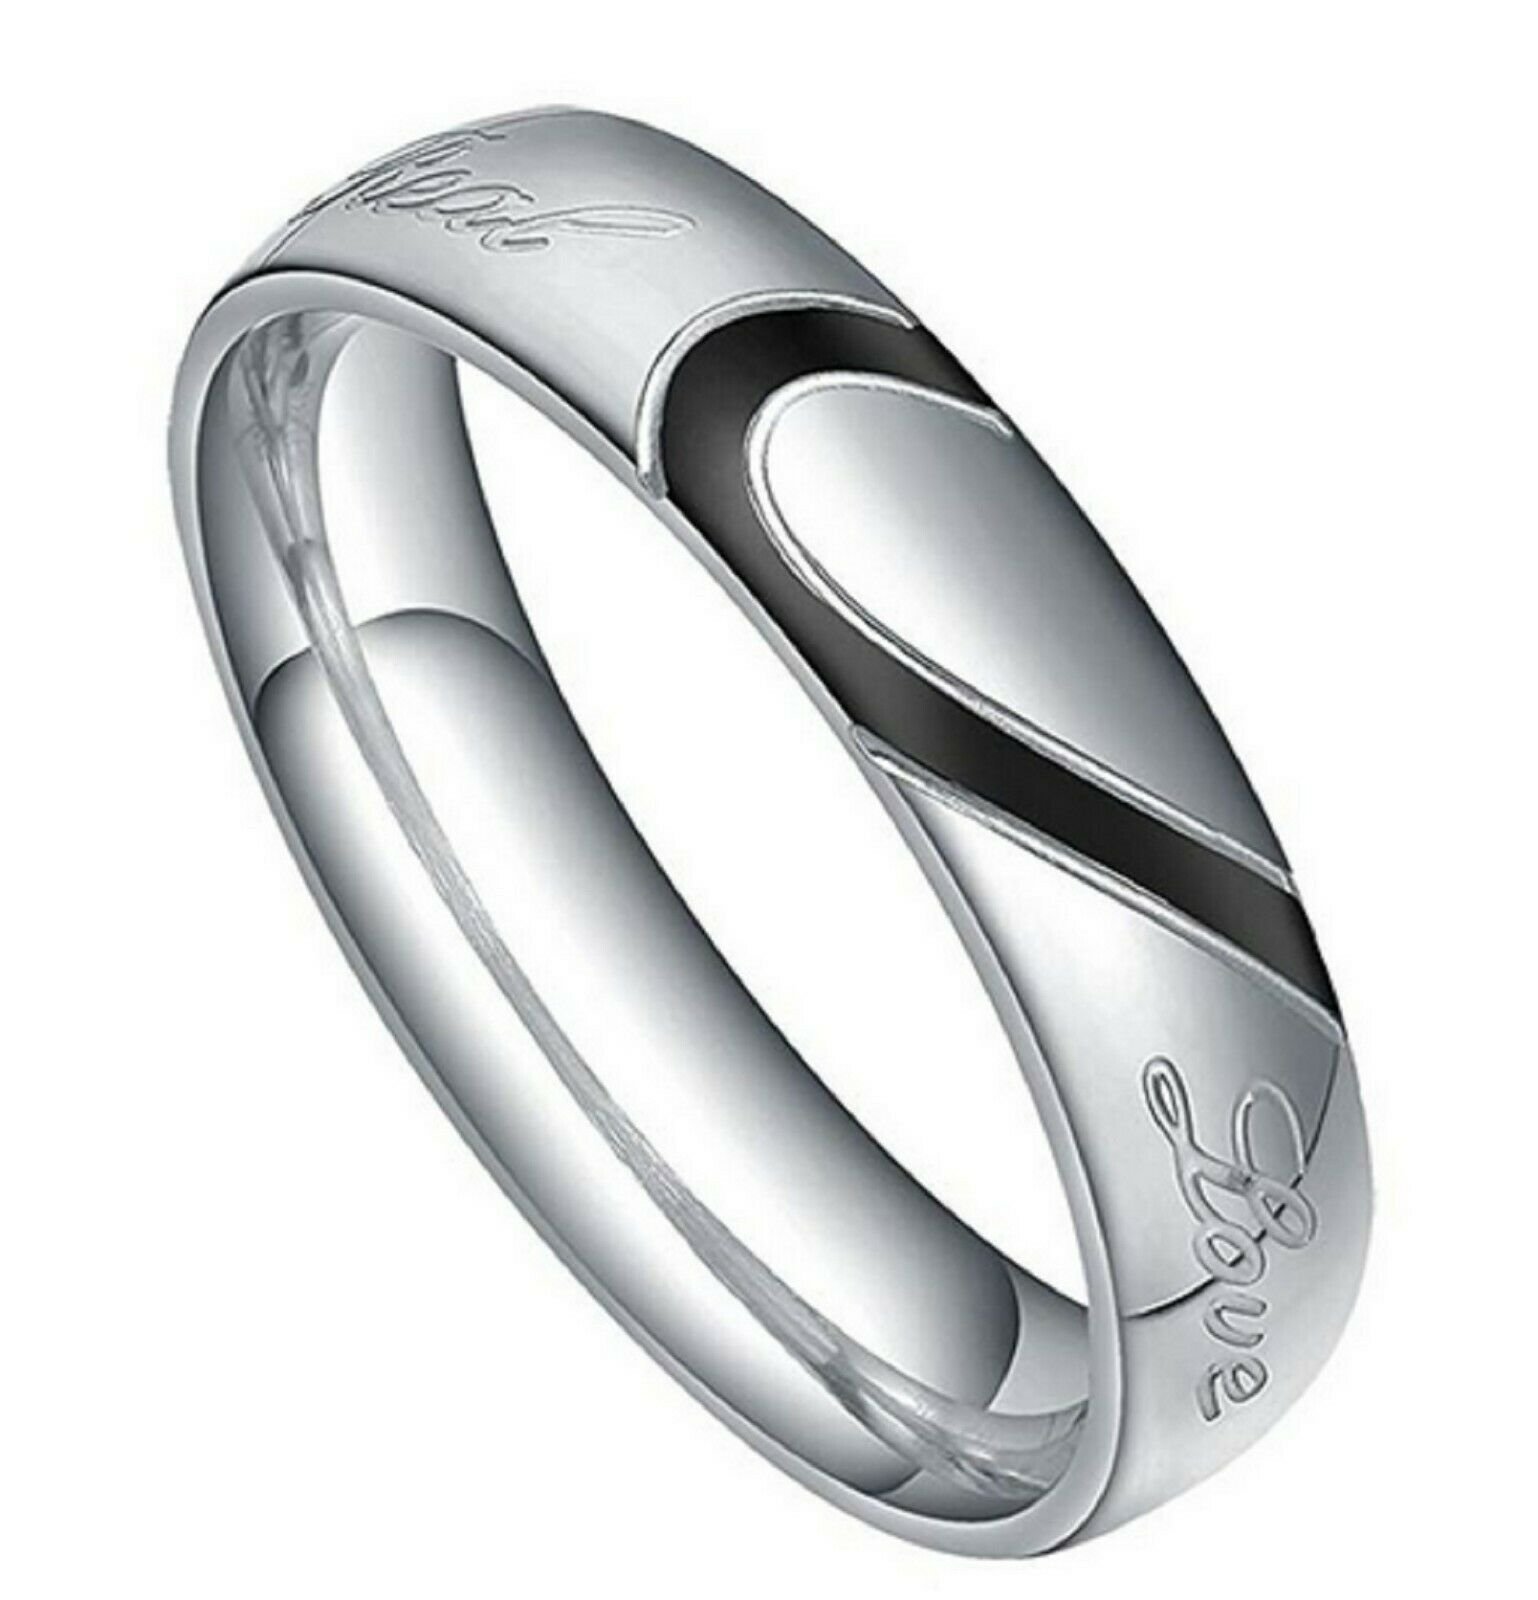 Couple's Matching Heart Ring, REAL Love His or Hers Wedding Band Promise Ring